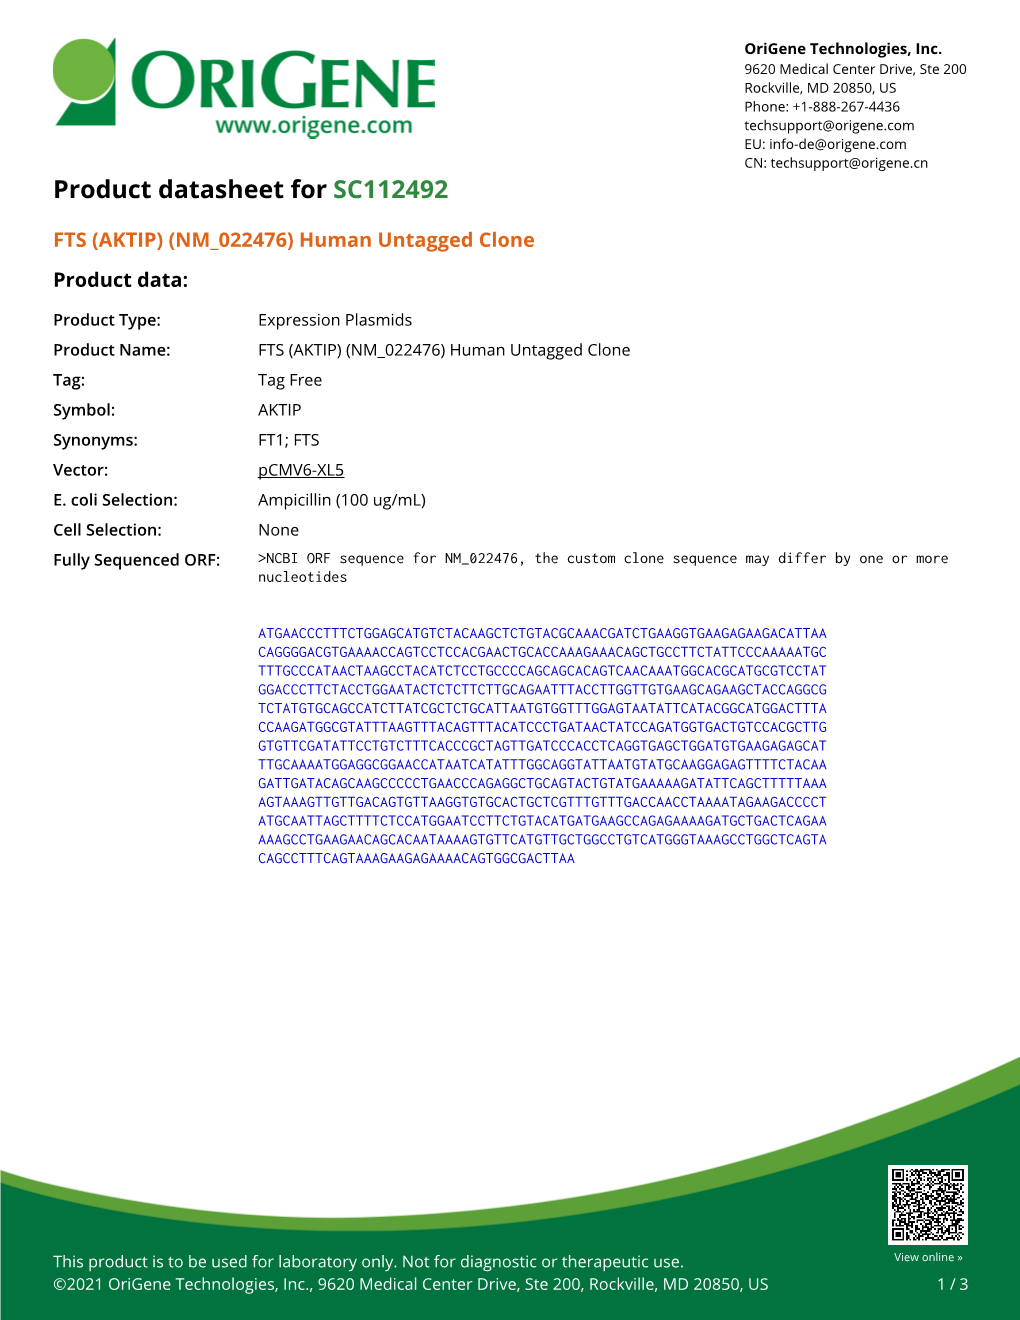 FTS (AKTIP) (NM 022476) Human Untagged Clone Product Data